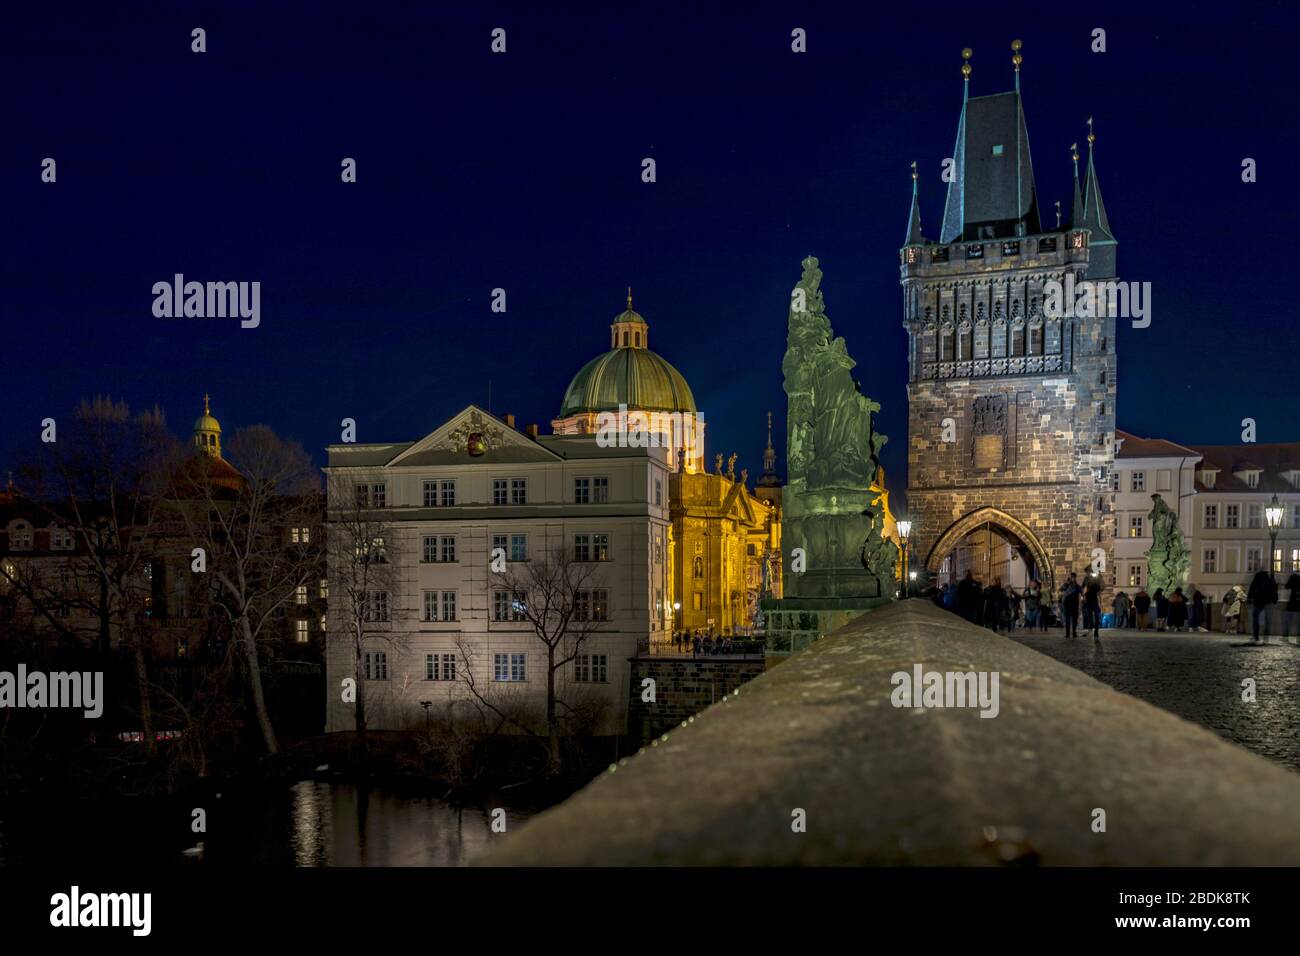 Famous Charles Bridge and tower at night, Prague, Czech Republic Stock Photo